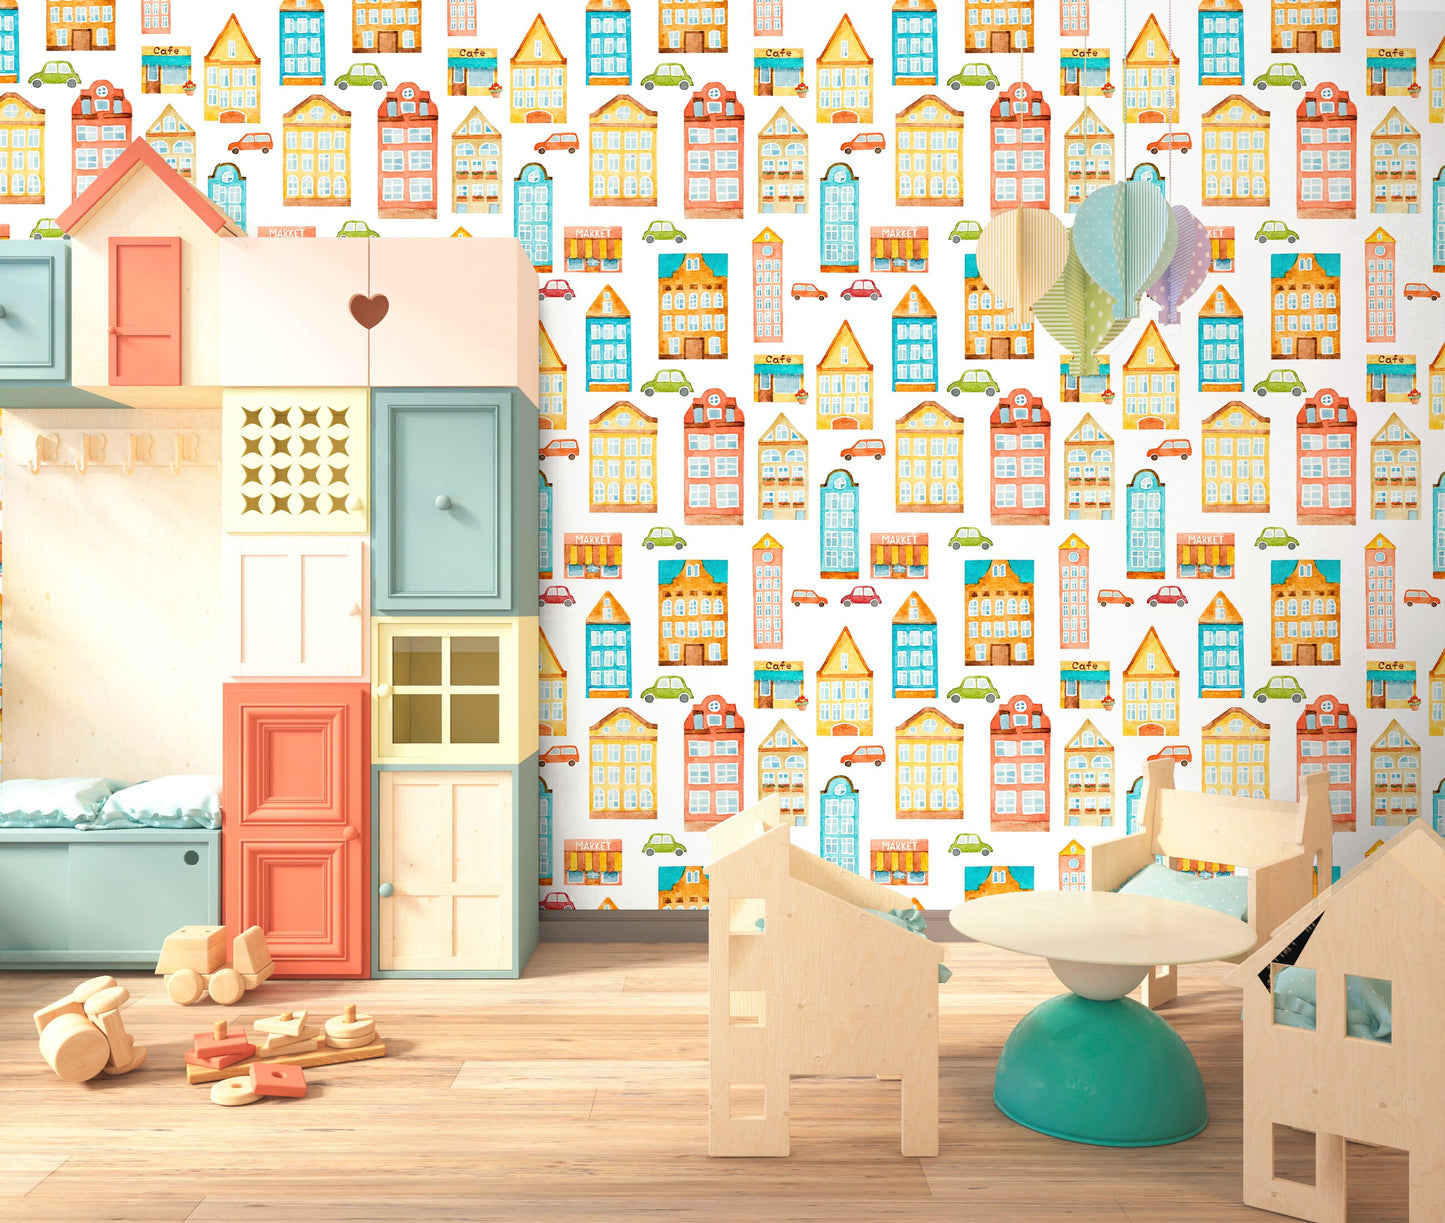 City Wallpaper Peel and Stick, Cars Wallpaper, Kids Room Wallpaper, Removable Wall Paper